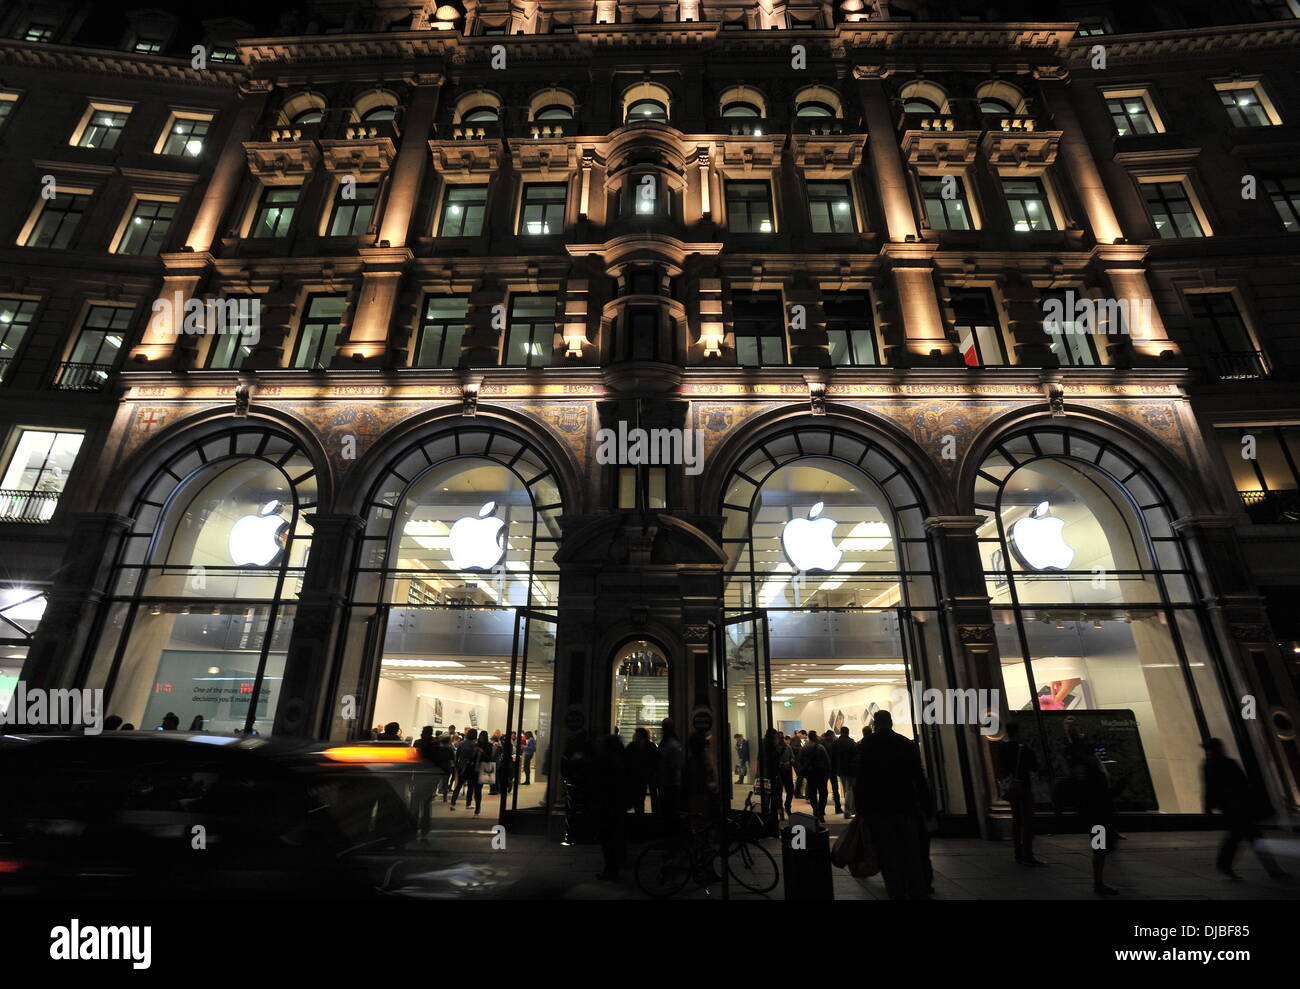 Customers are shopping at Apple's Regent Street store before the company's new iPhone 5 goes on sale the next morning. London, England - 20.09.12 Stock Photo